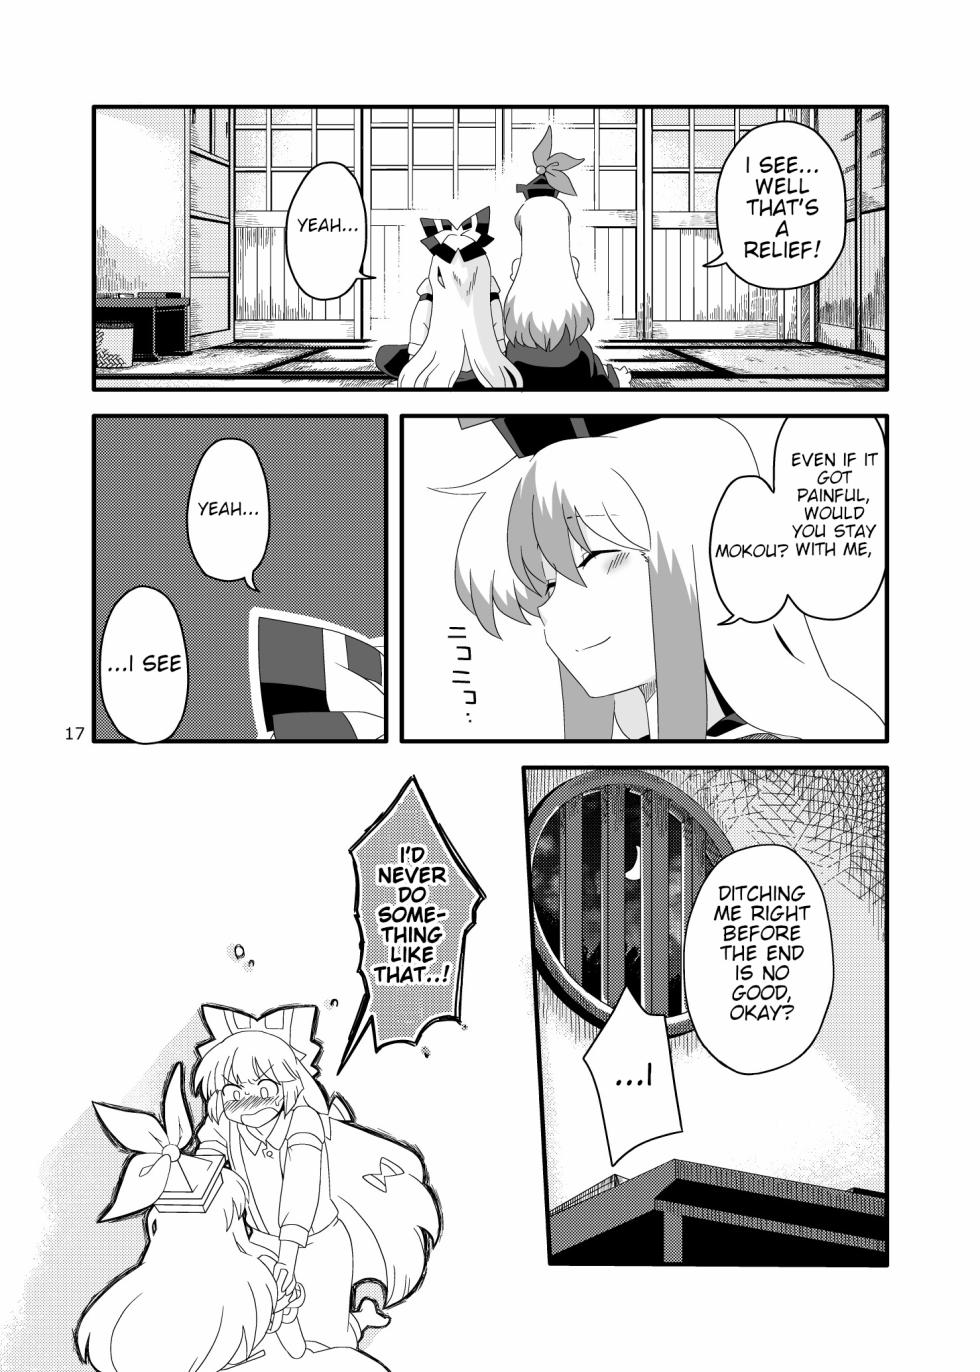 [RUMP (Bon)] Red History to Green Spice 4 (Touhou Project) [English] - Page 16